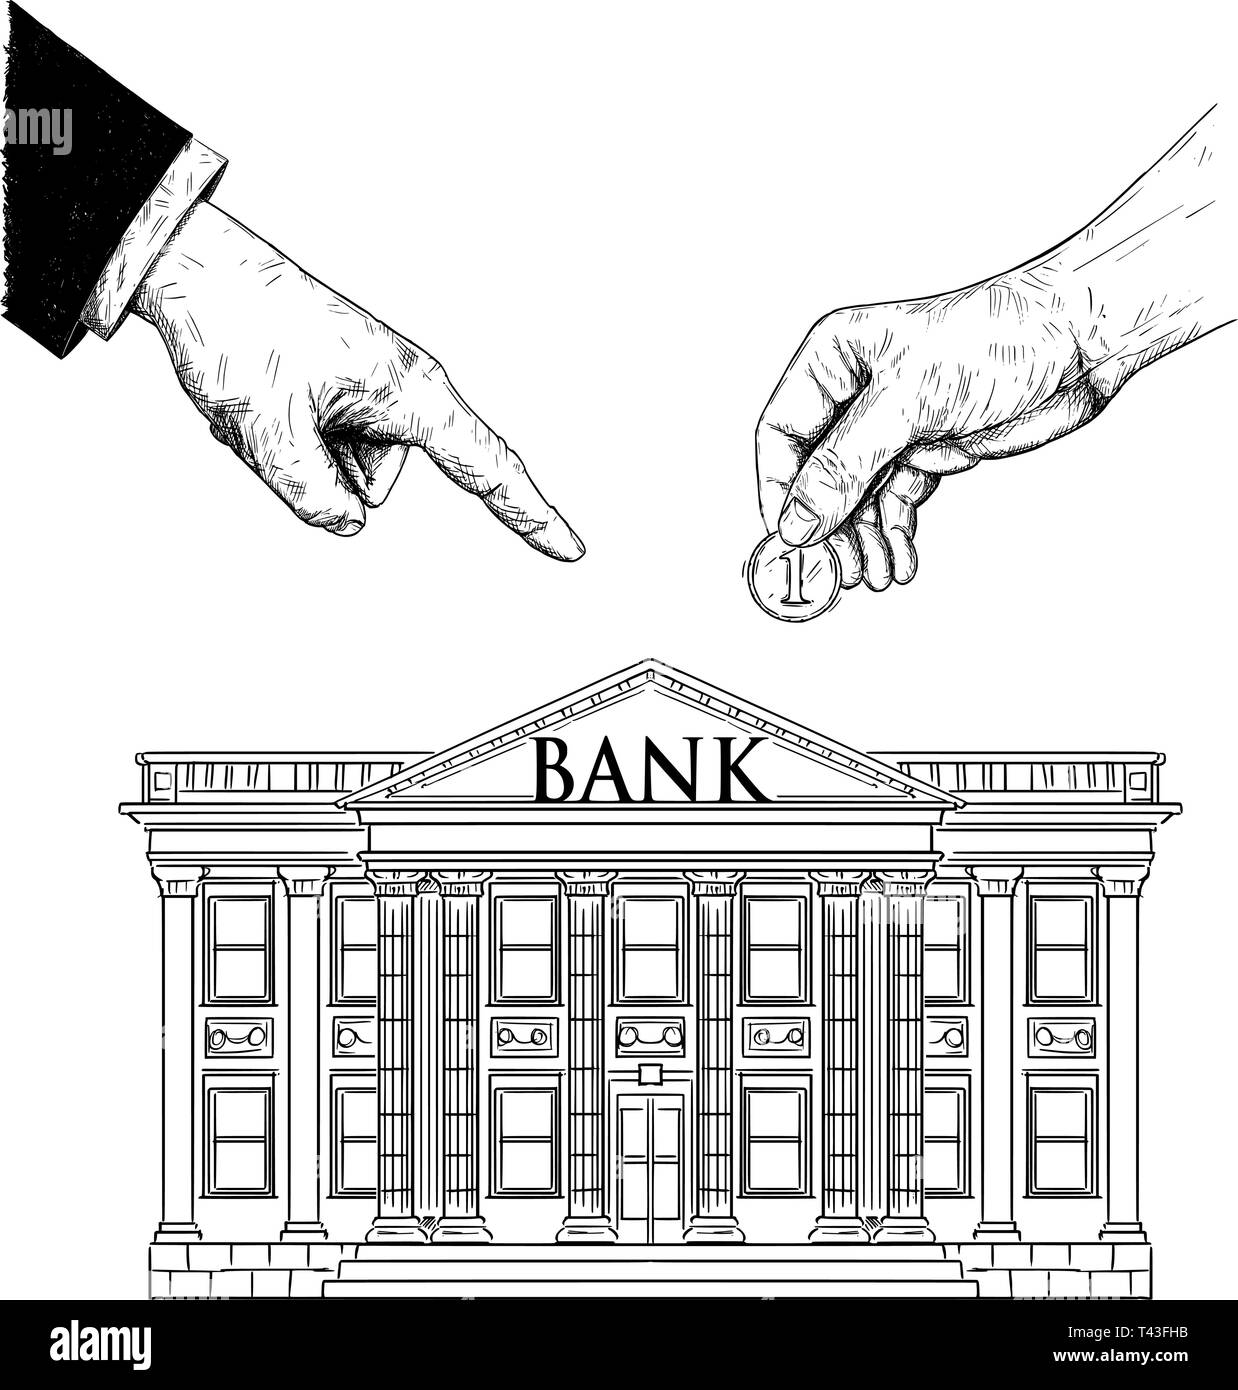 Vector black and white drawing of hand of politician or businessman is ordering or advising an ordinary person to put coin representing savings in bank. Metaphor of investment and finance. Stock Vector